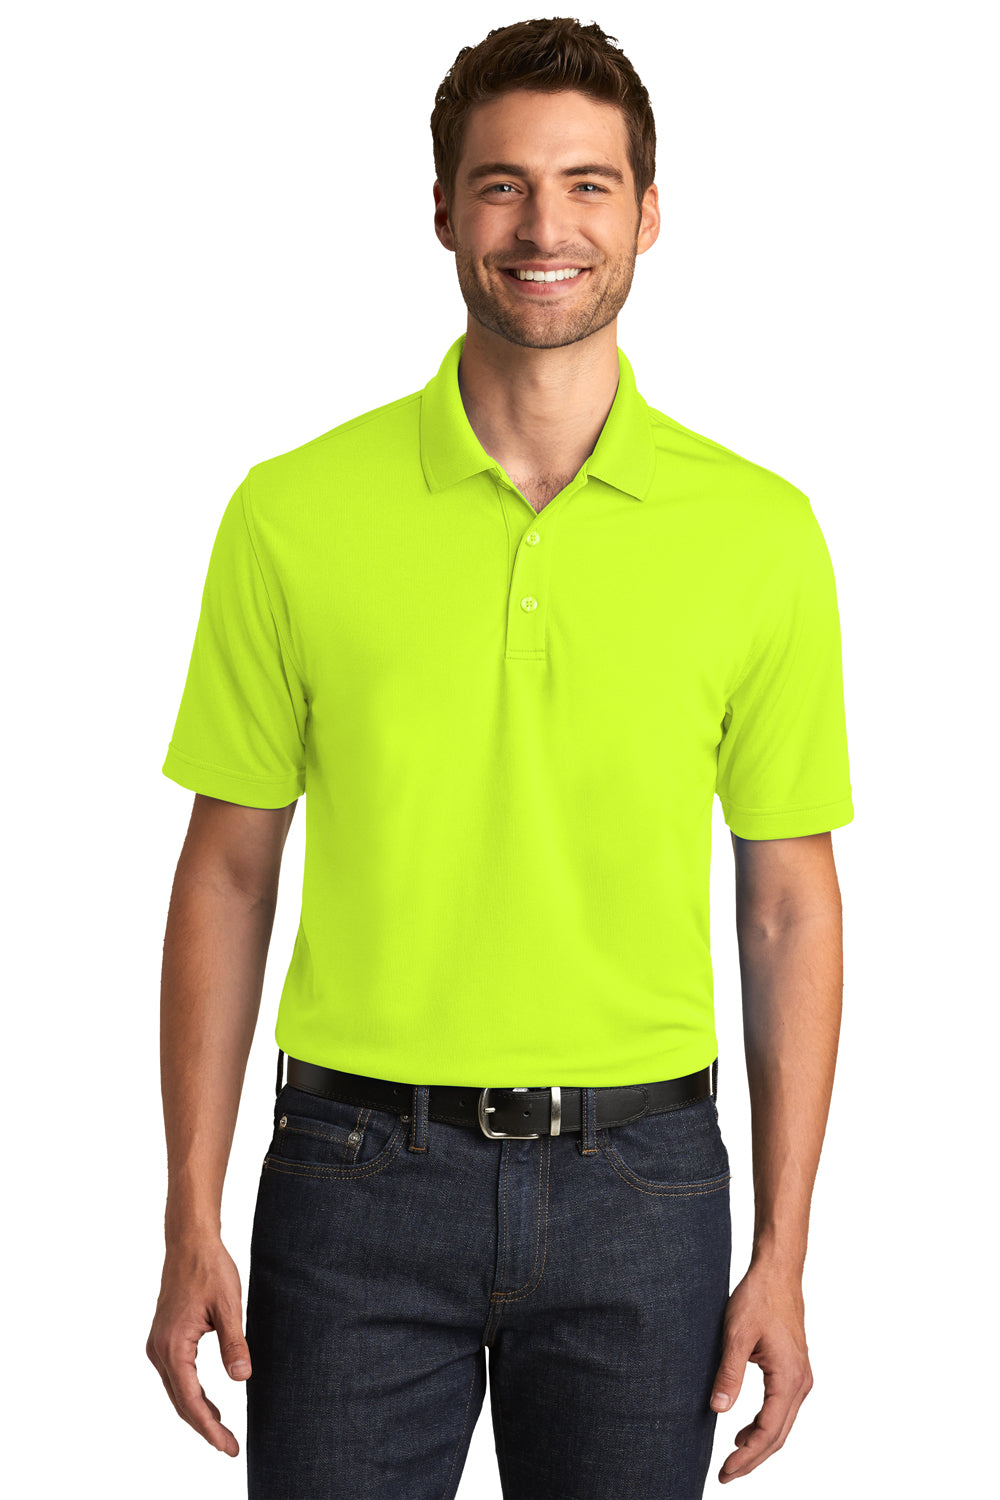 Port Authority Mens Dry Zone Moisture Wicking Short Sleeve Polo Shirt Safety Yellow Front